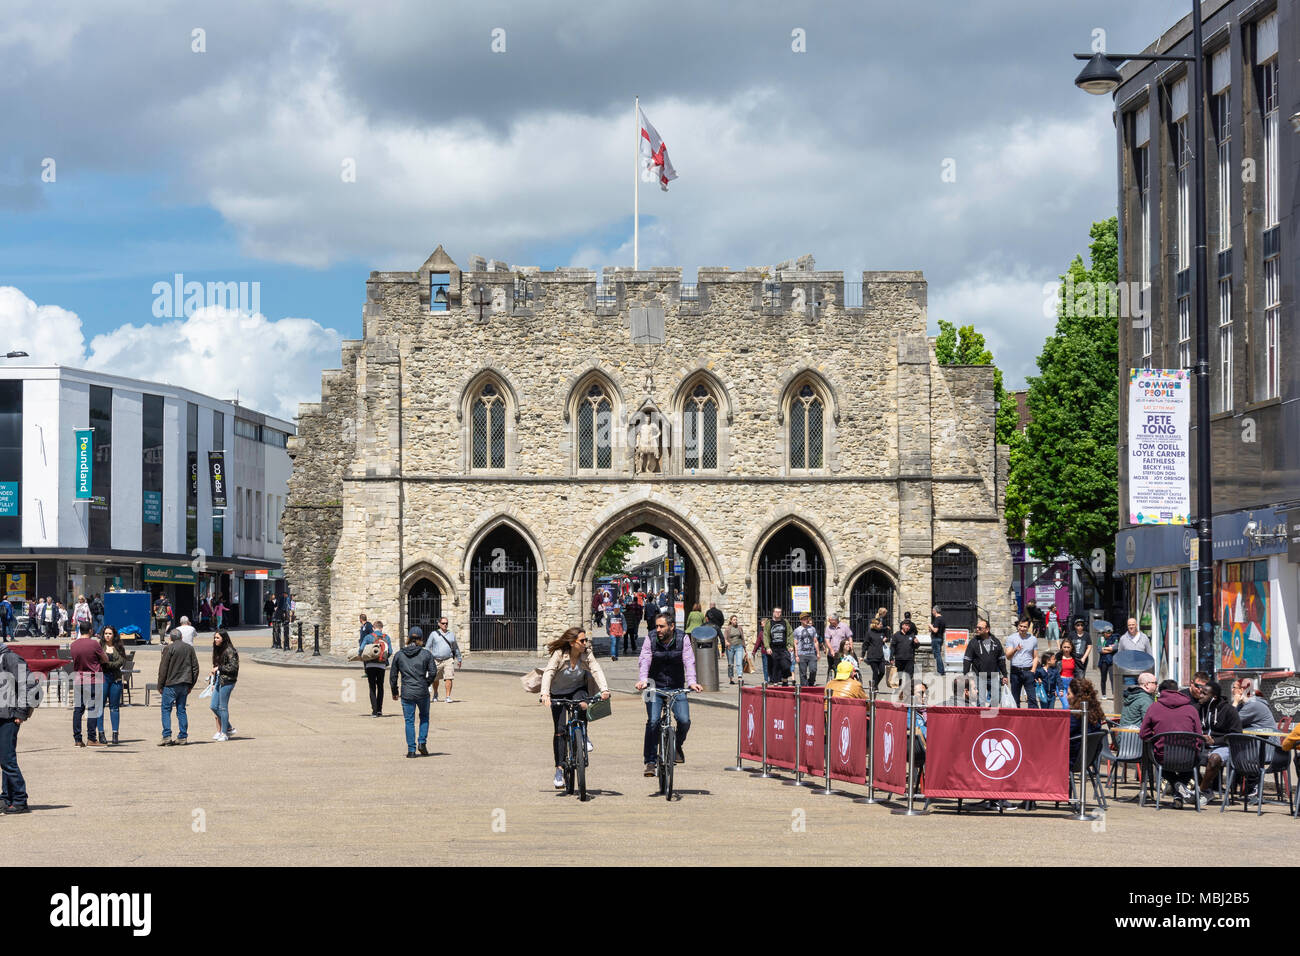 The 12th century Bargate and Guildhall, High Street, Old Town, Southampton, Hampshire, England, United Kingdom Stock Photo